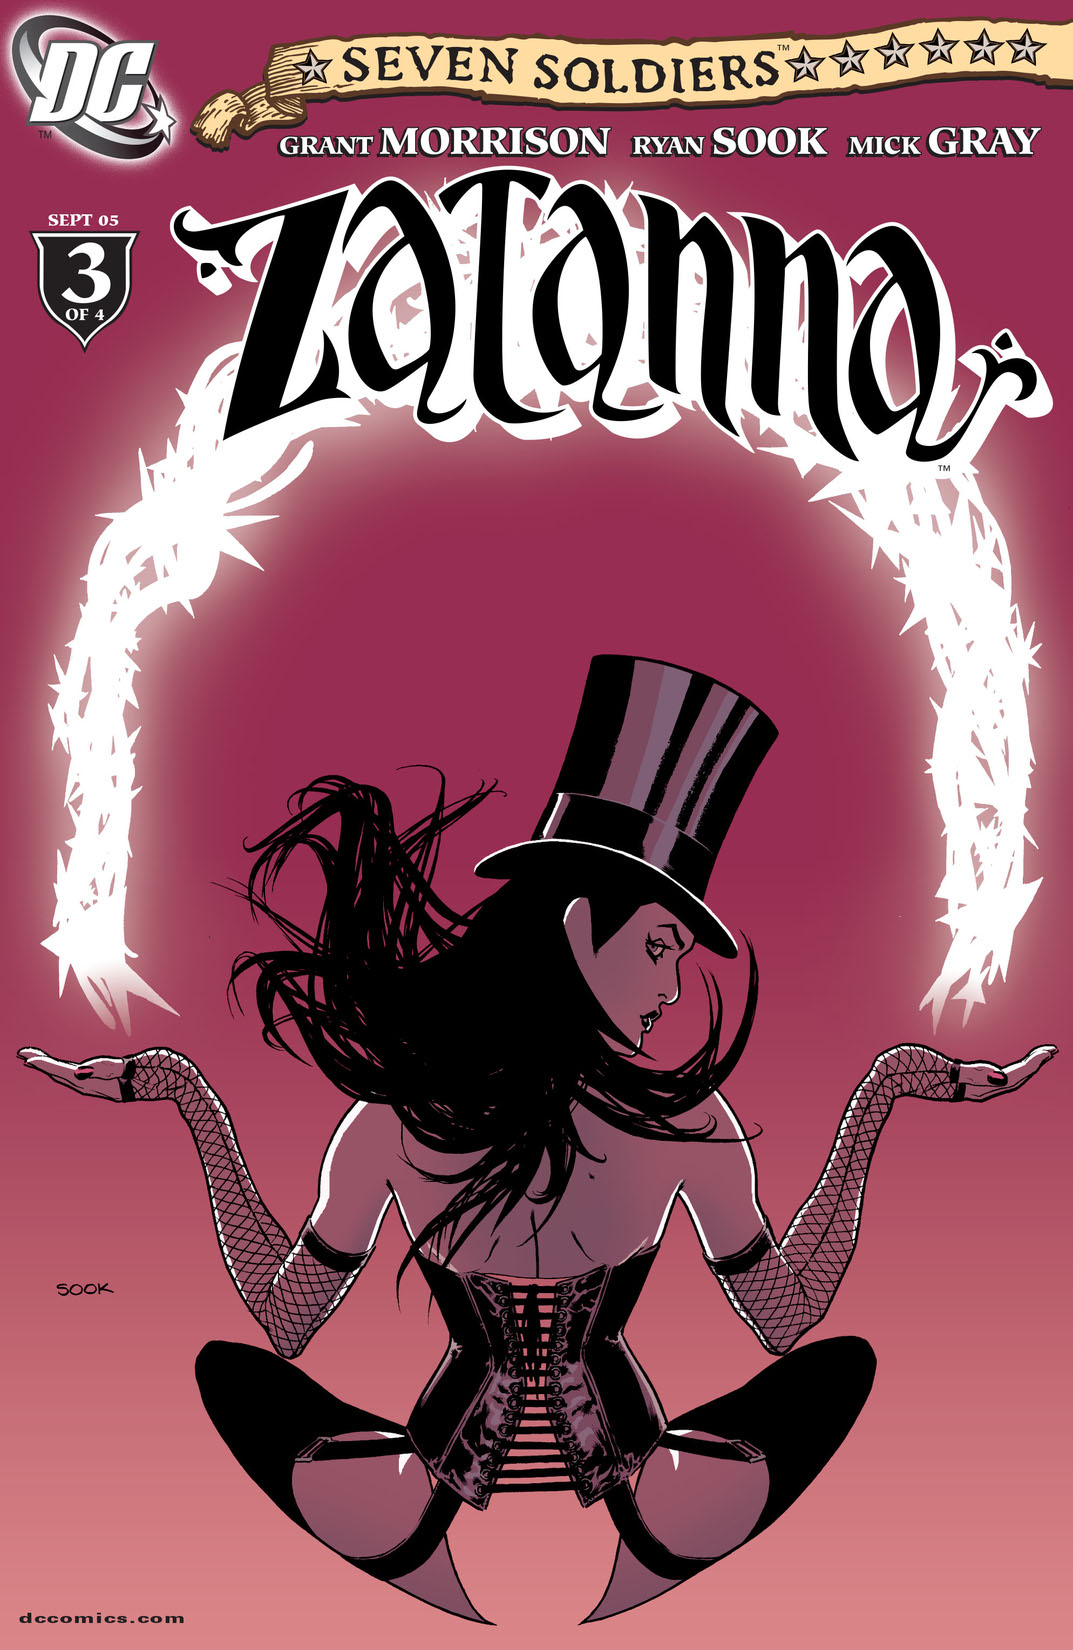 Seven Soldiers: Zatanna #3 preview images